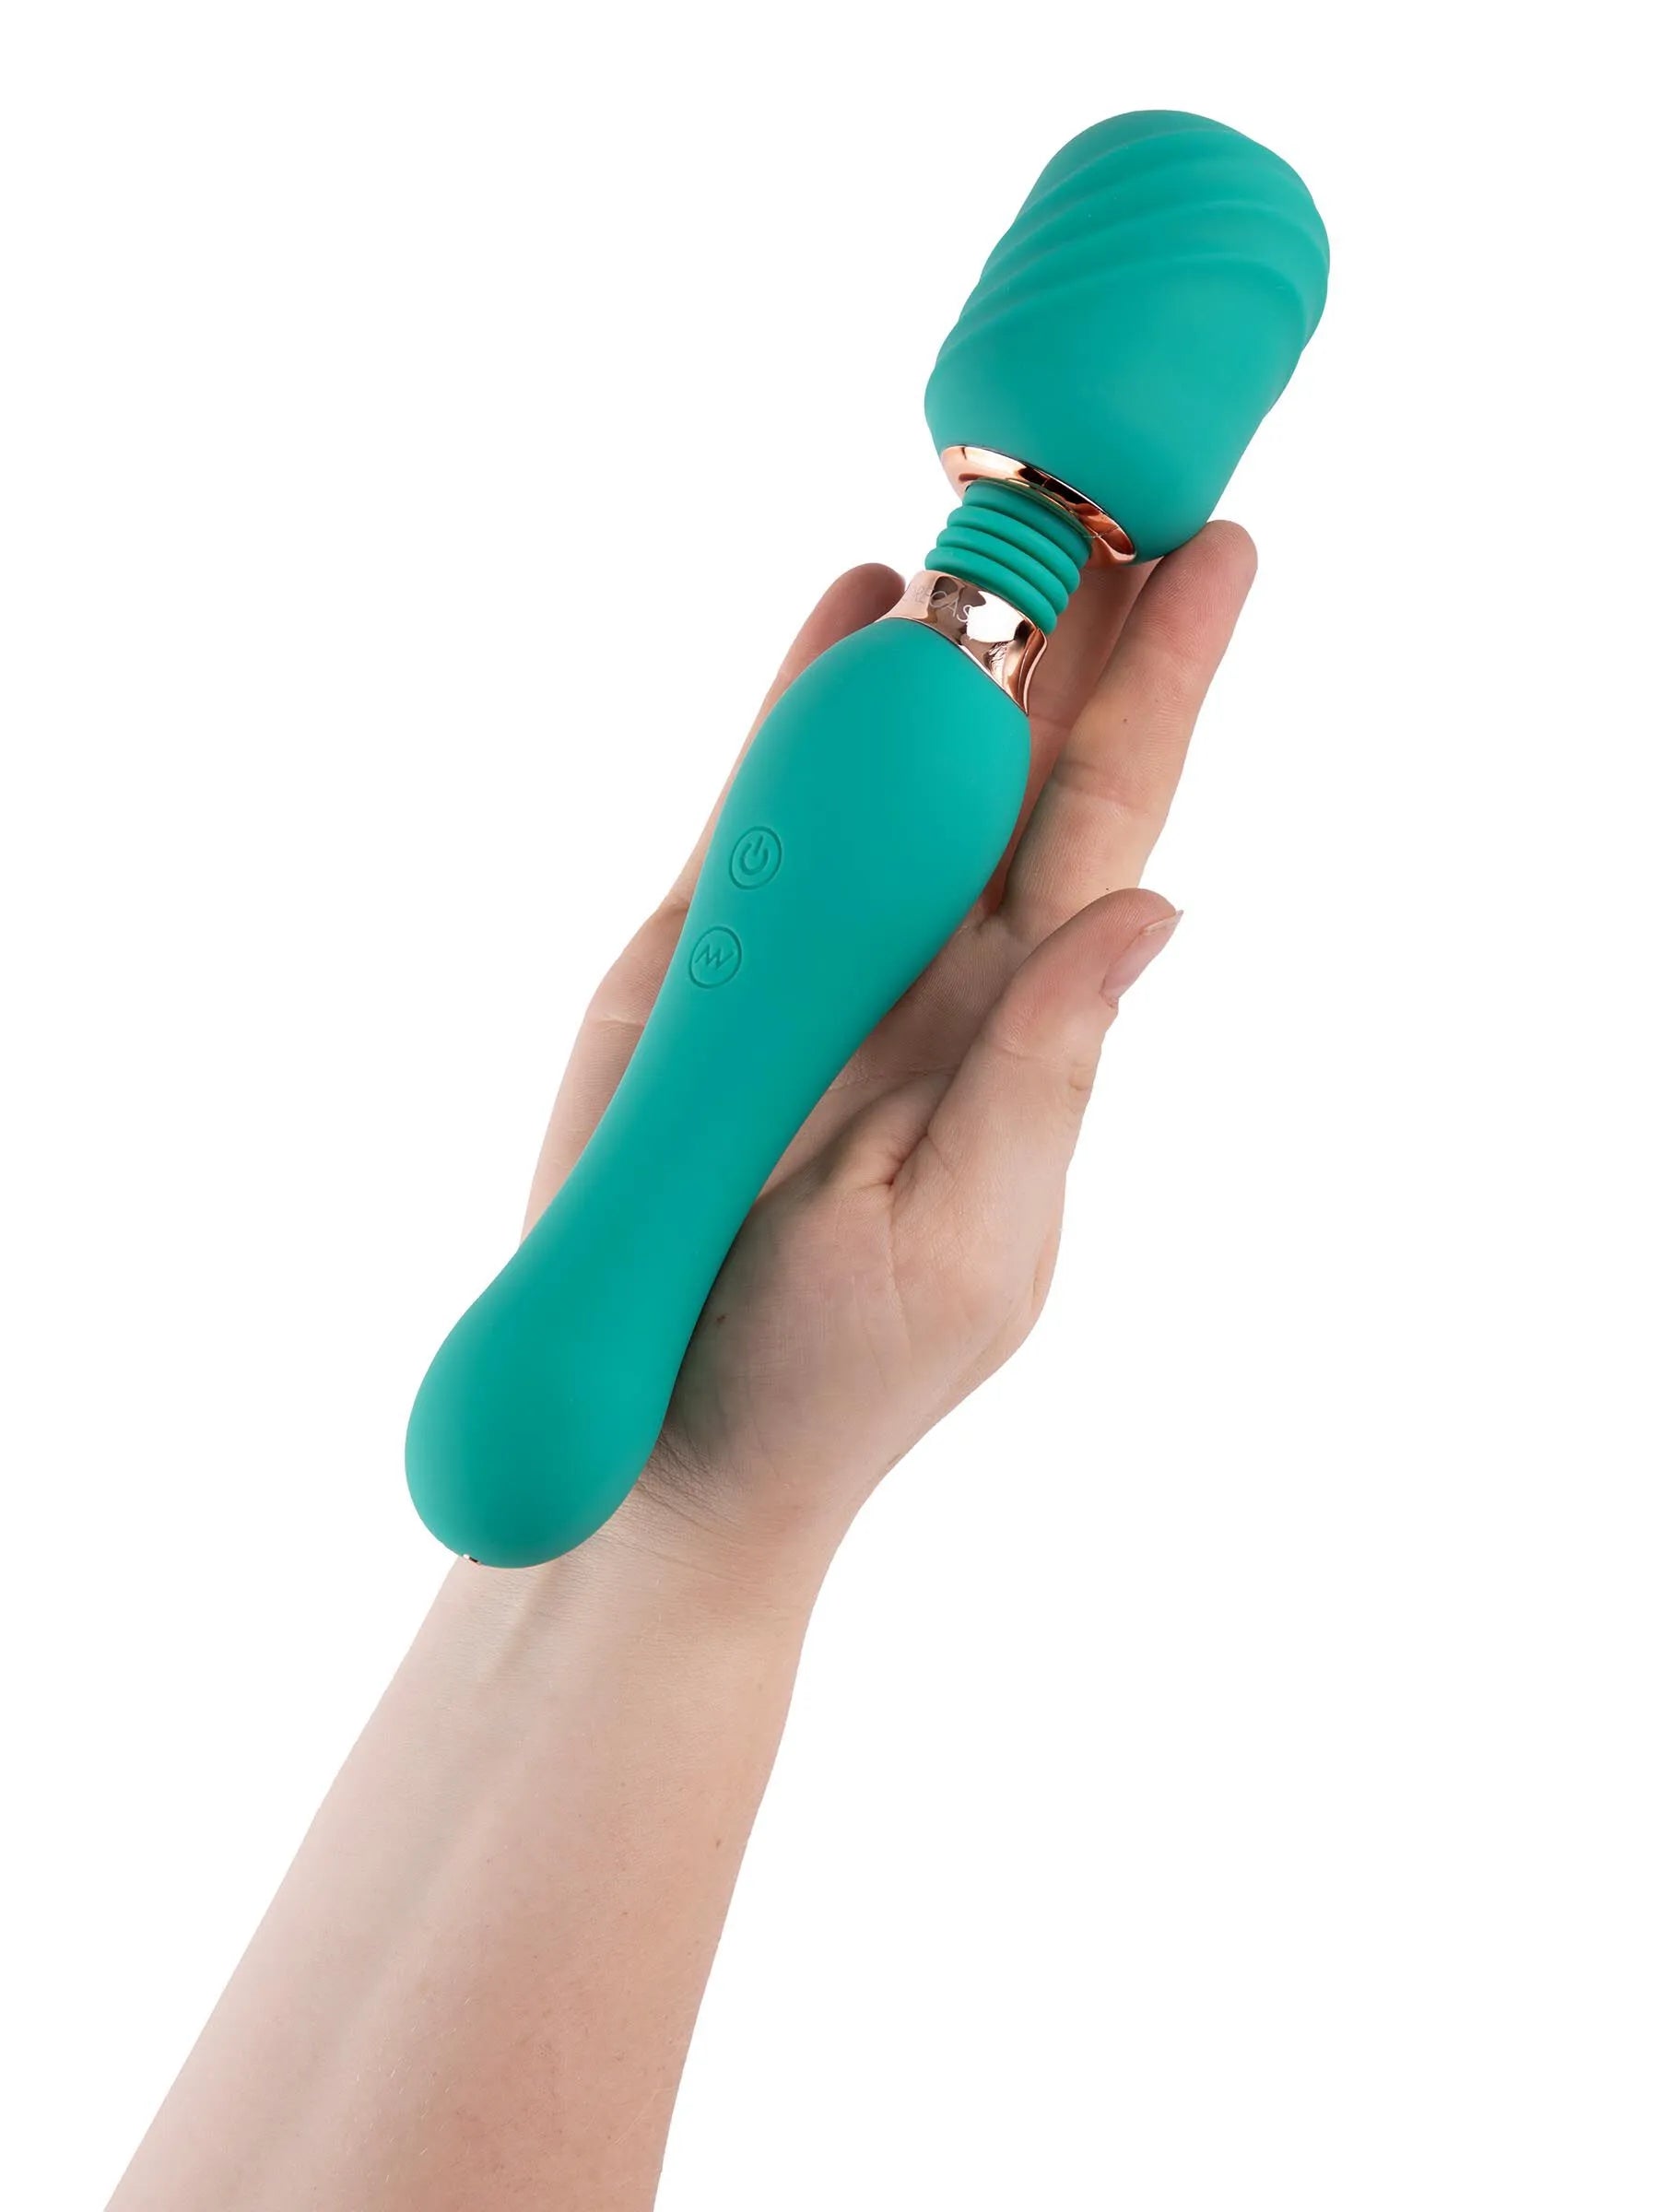 Moregasm Plus Boost Wand From Ann Summers, Image 07